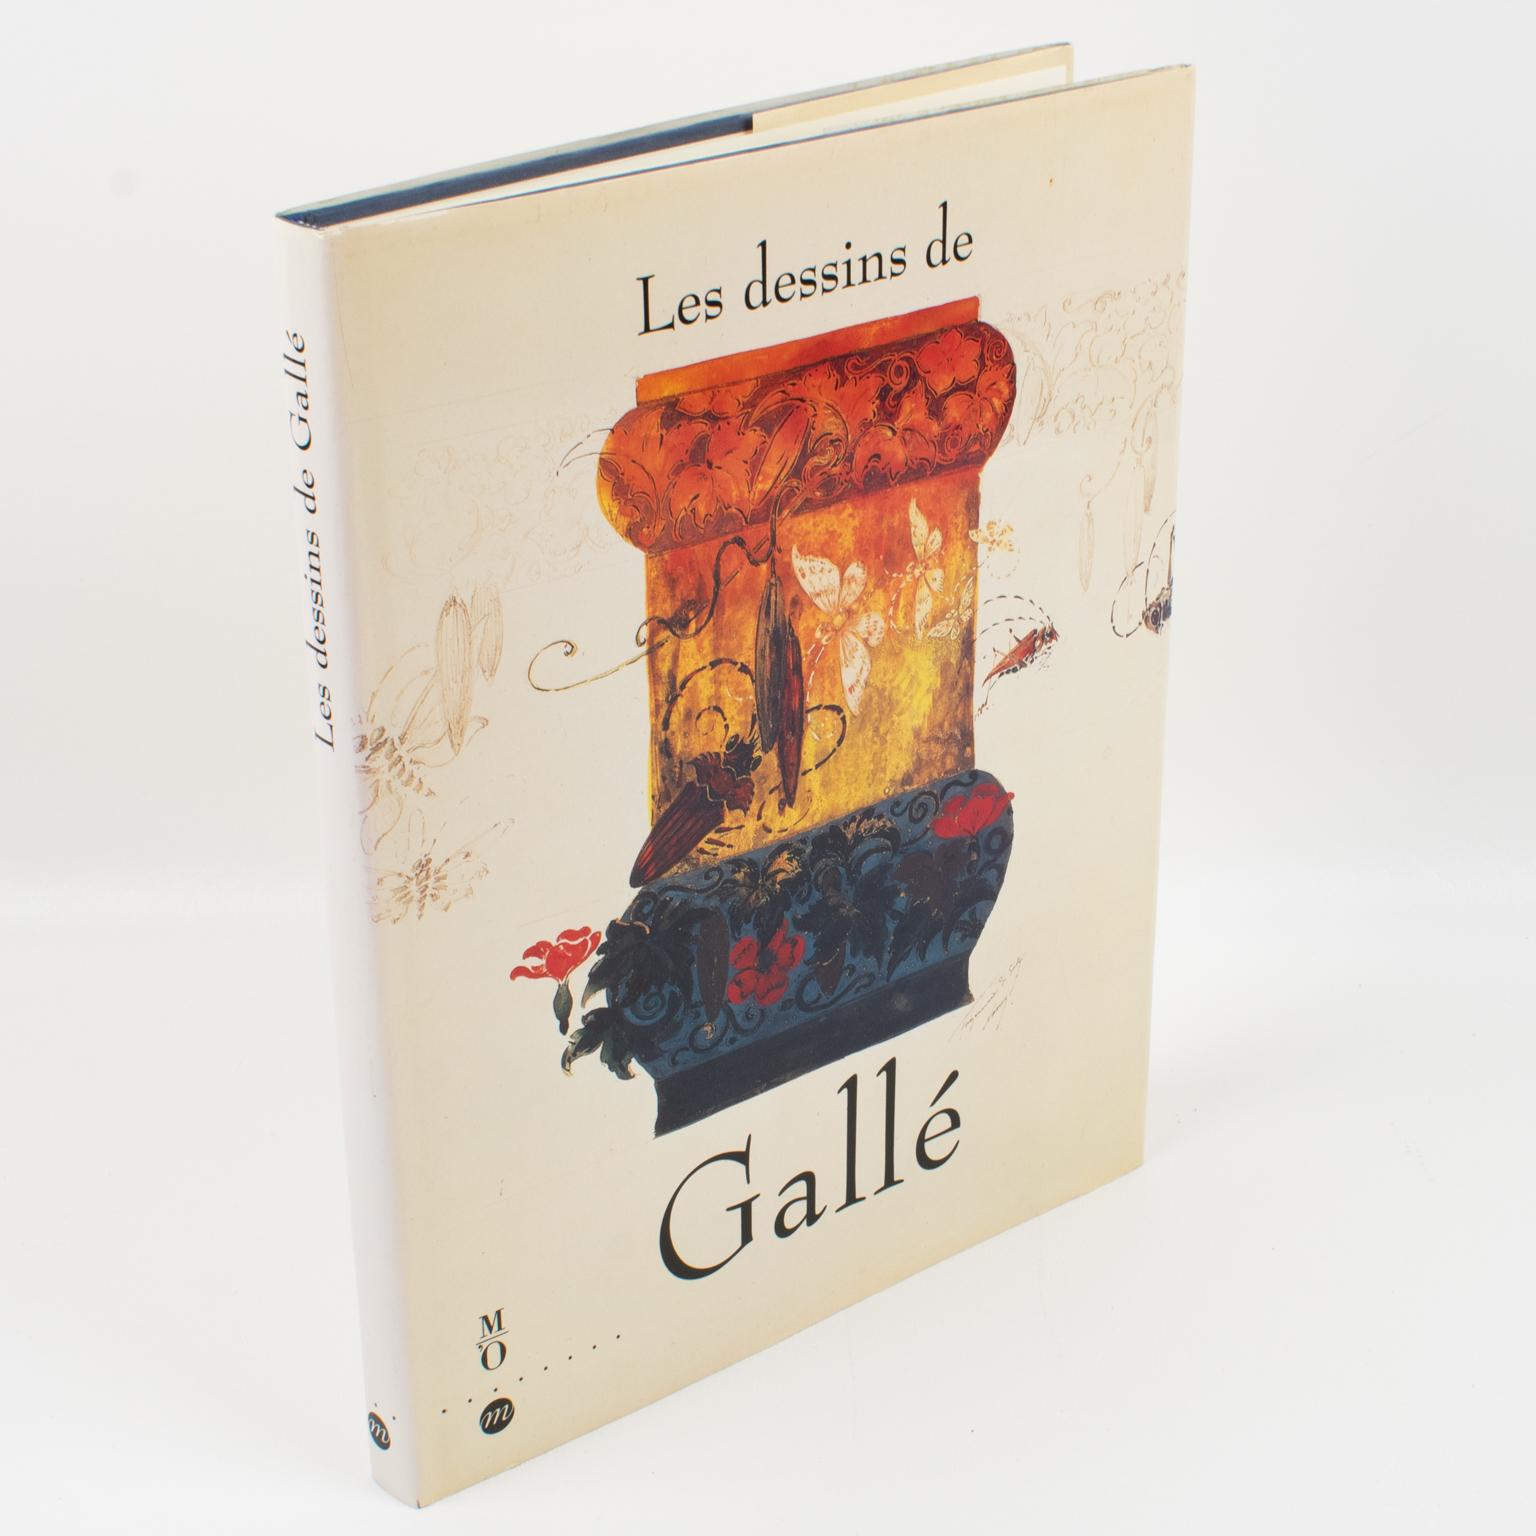 Les Dessins de Gallé, (Gallé Drawings), French Book by Philippe Thiebaut, 1993.
A selection of the most beautiful sketches, studies, and models intended for Gallé's performers bequeathed by Emile Gallé's grandson to the Musée d Orsay in Paris.
This